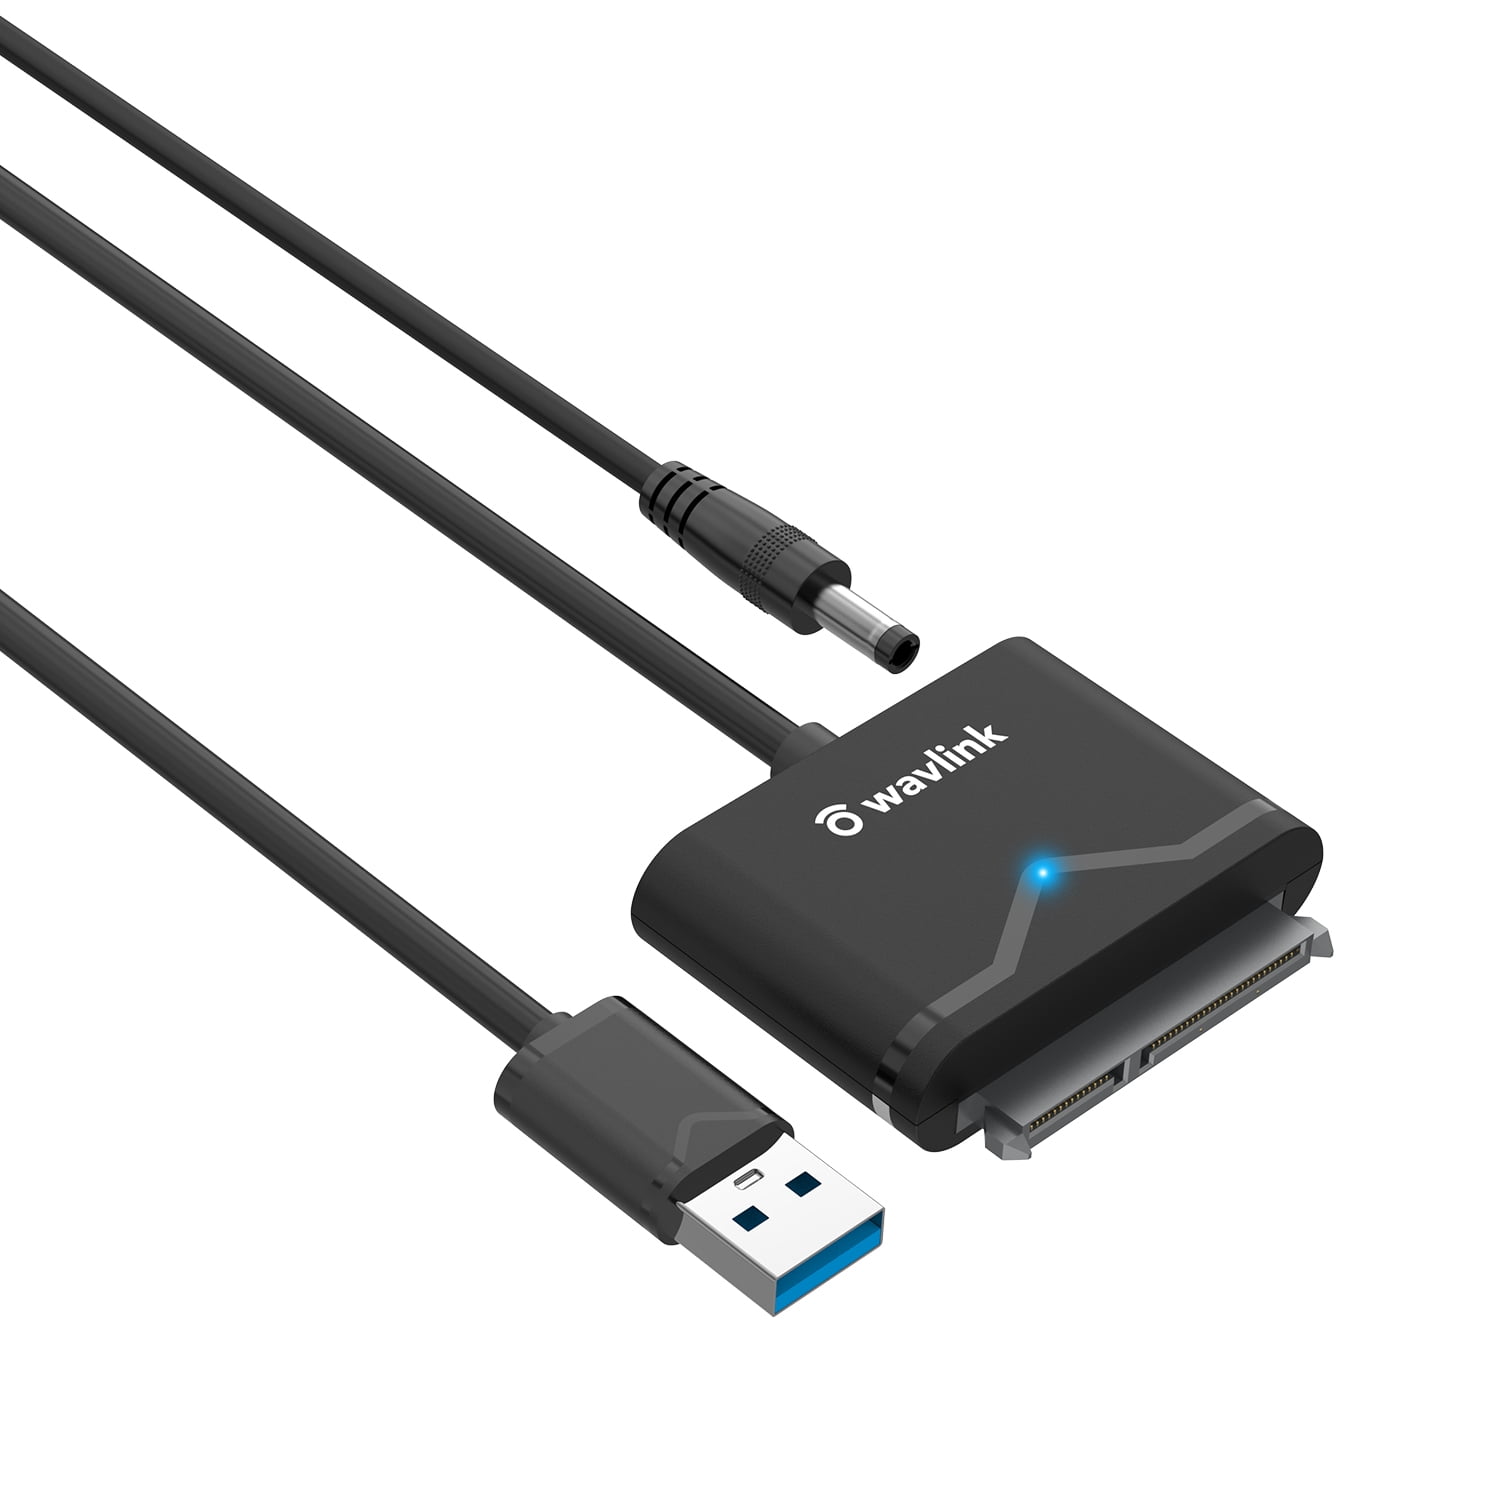 Wavlink USB 3.0 SATA III Hard Drive Adapter Cable, SATA to USB 5Gbps Adapter Cable 2.5" HDD/SSD & 3.5" HDD Drive Connector with 12V/2A Power Adapter, UASP, and